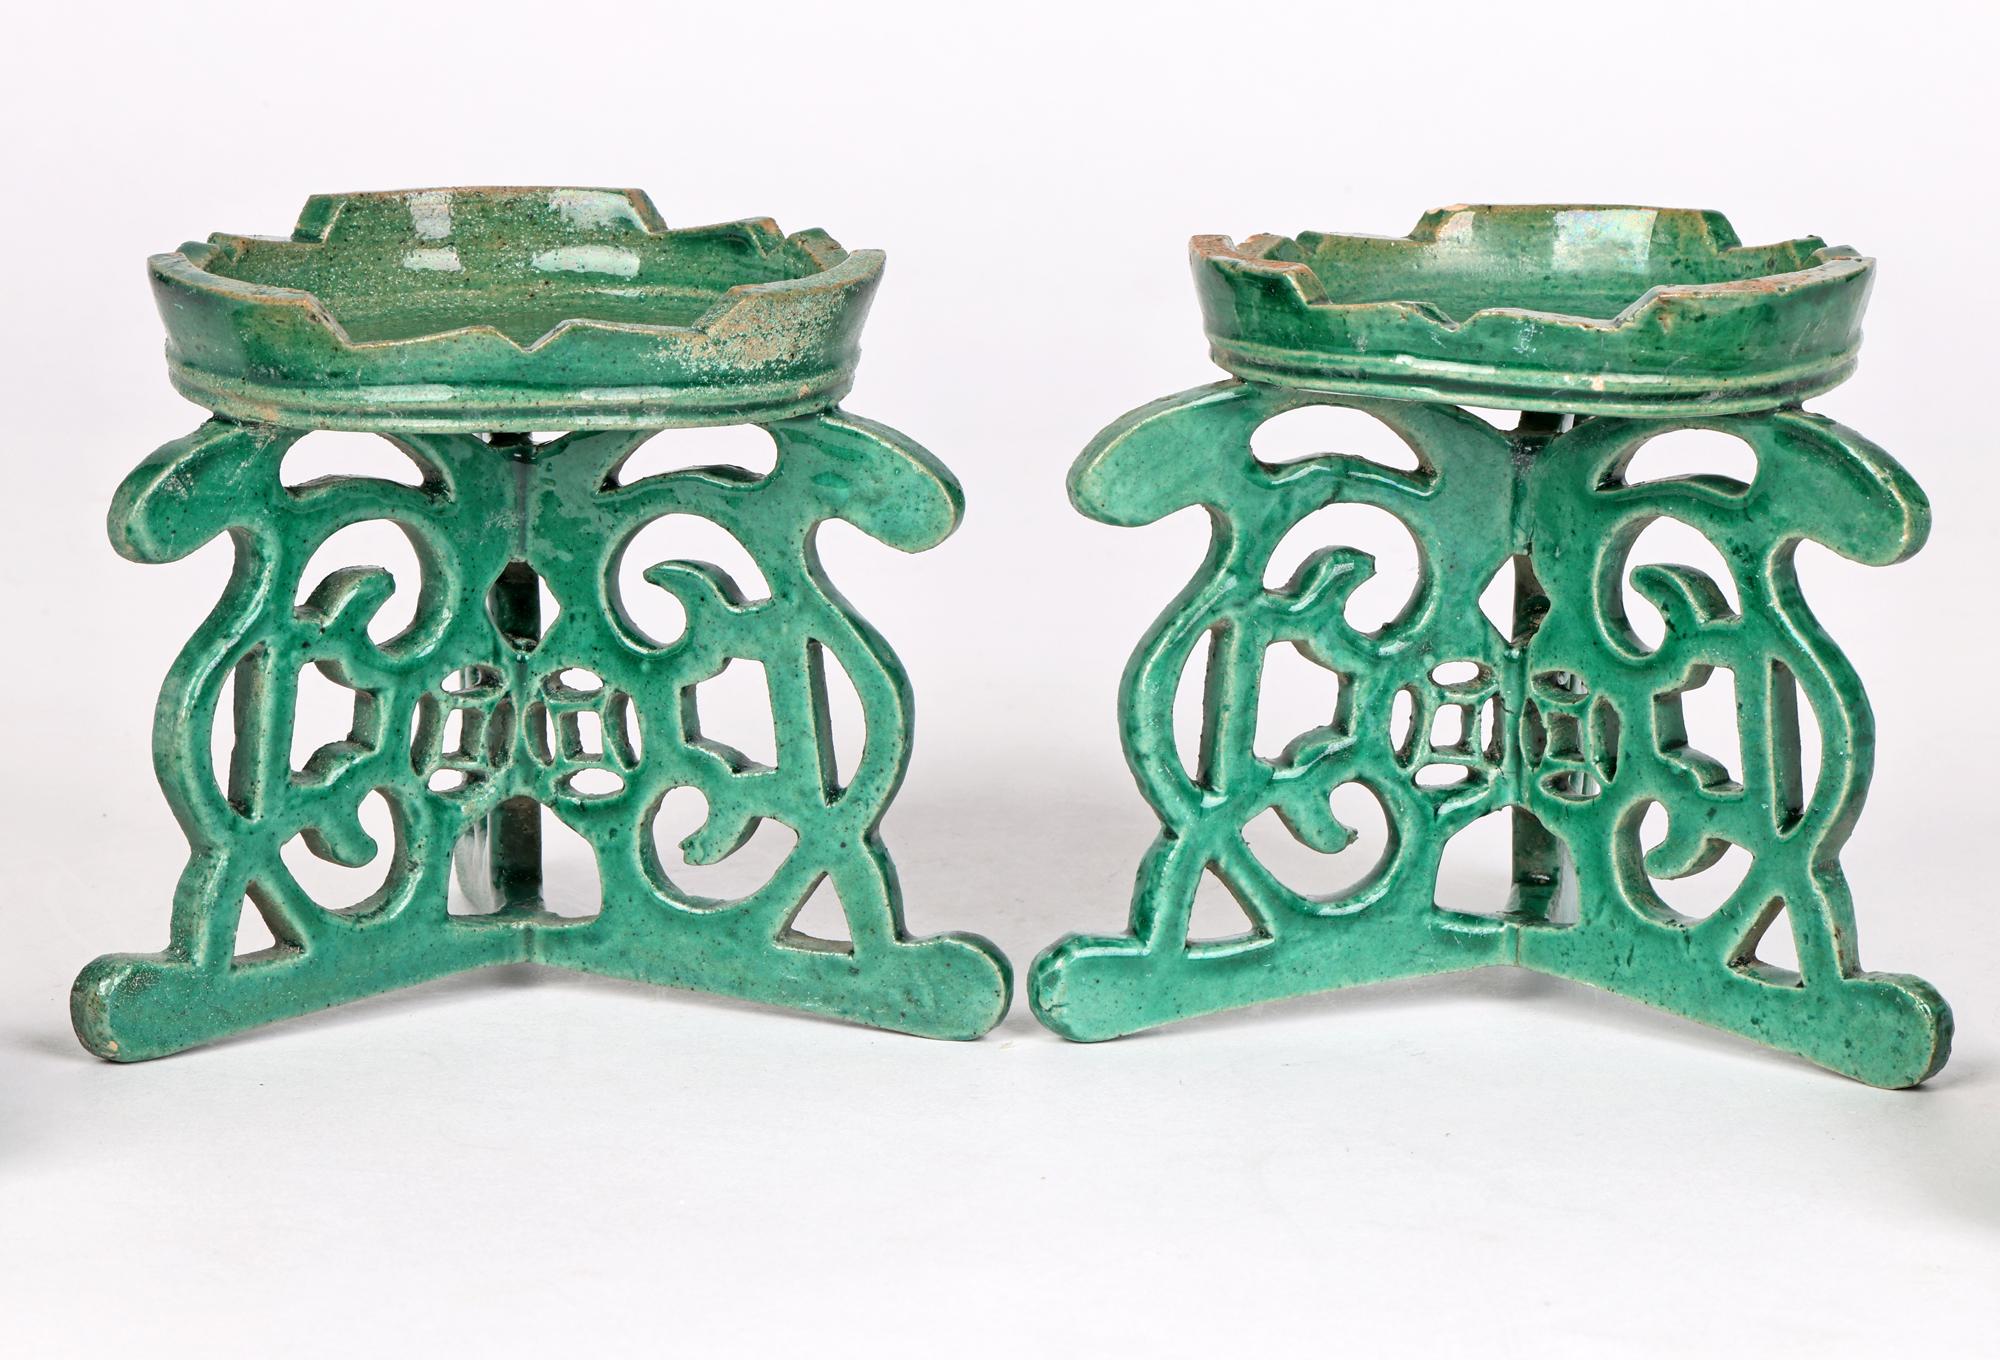 A fine pair antique Chinese qing green glazed pottery altar stands and dishes dating from the 19th century, possibly earlier. The stands are of circular shape, possibly for candles, and are mounted on a three legged pierced stand with scroll